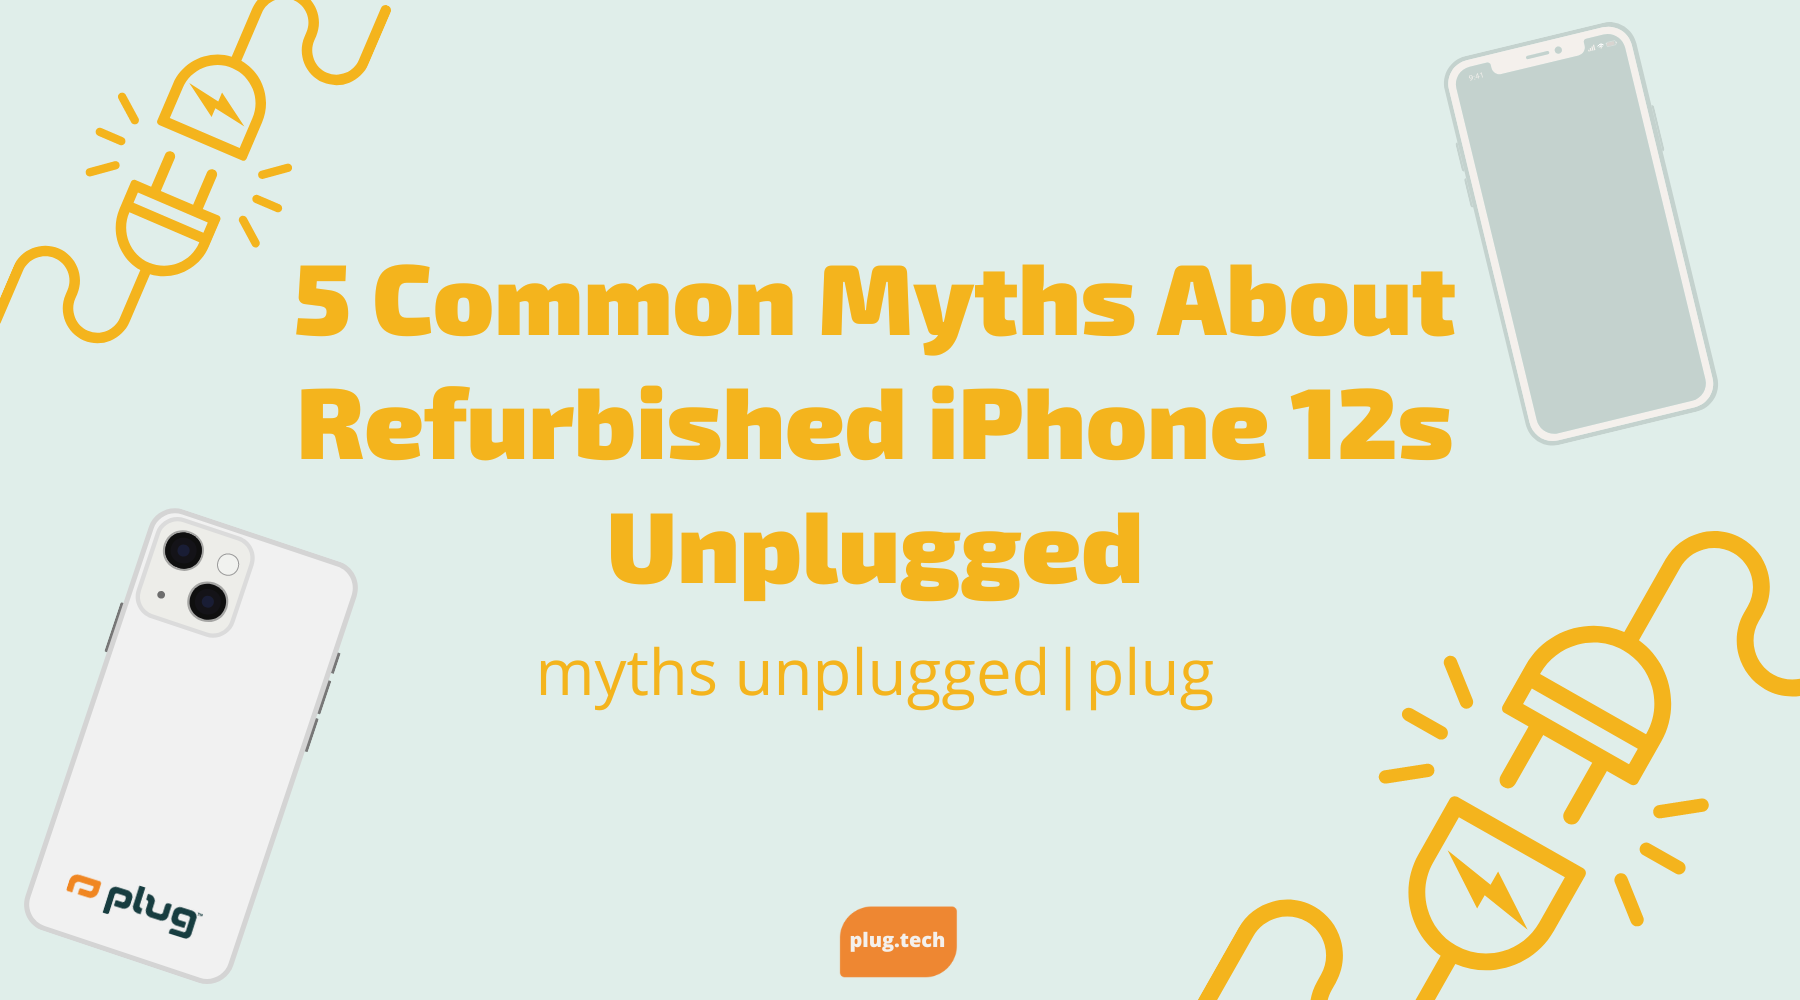 5 Common Myths About Refurbished iPhone 12s Debunked